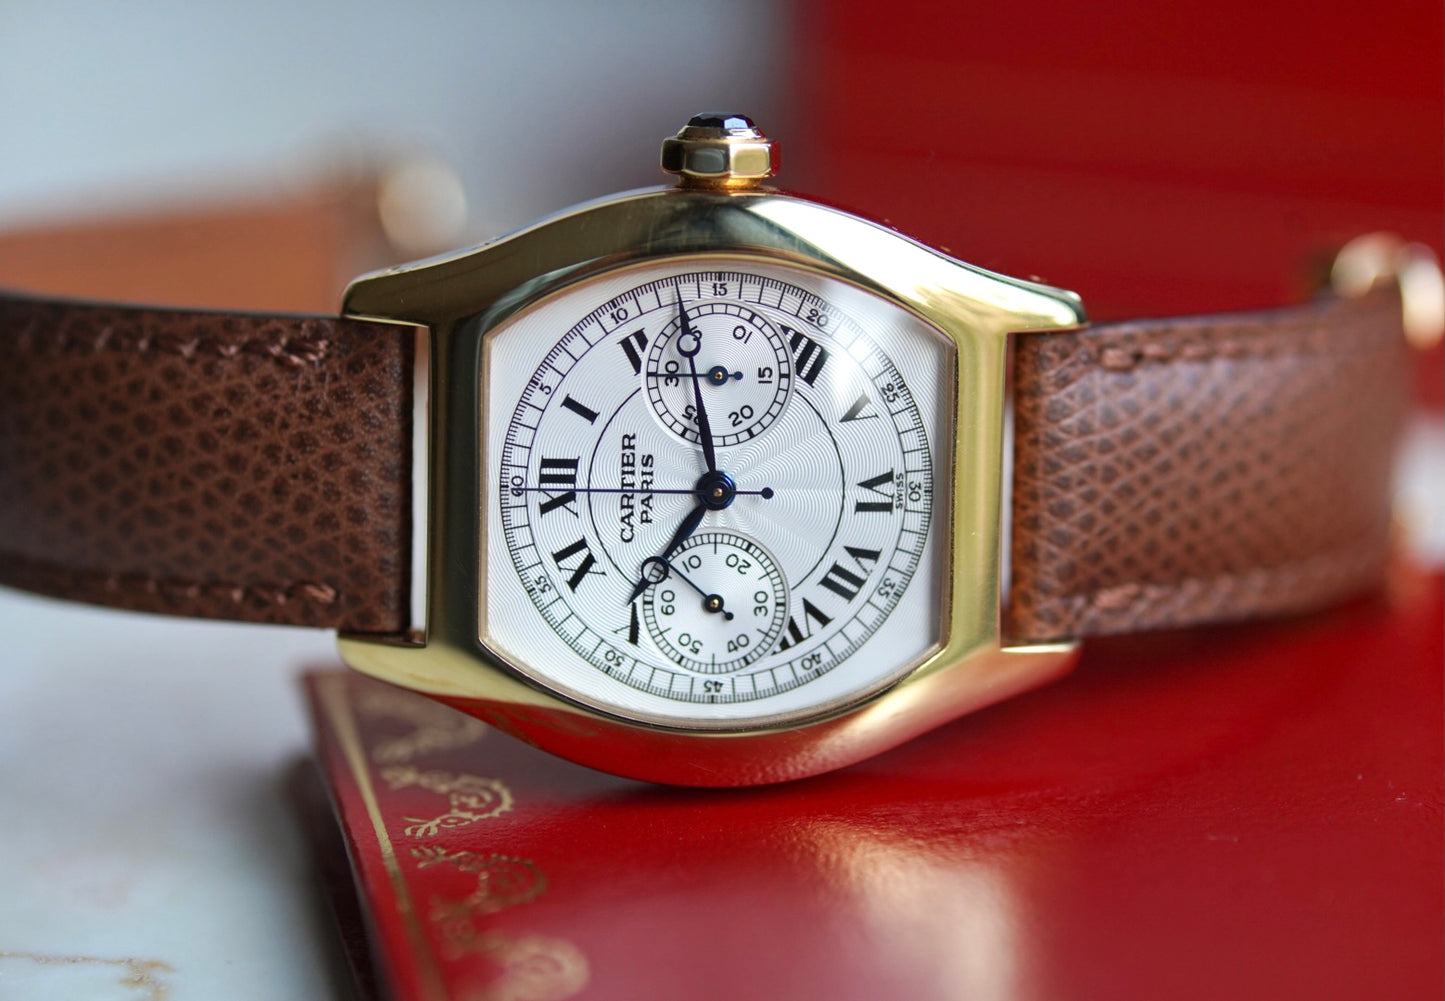 Cartier Tortue Monopoussoir YG CPCP Early 2000's